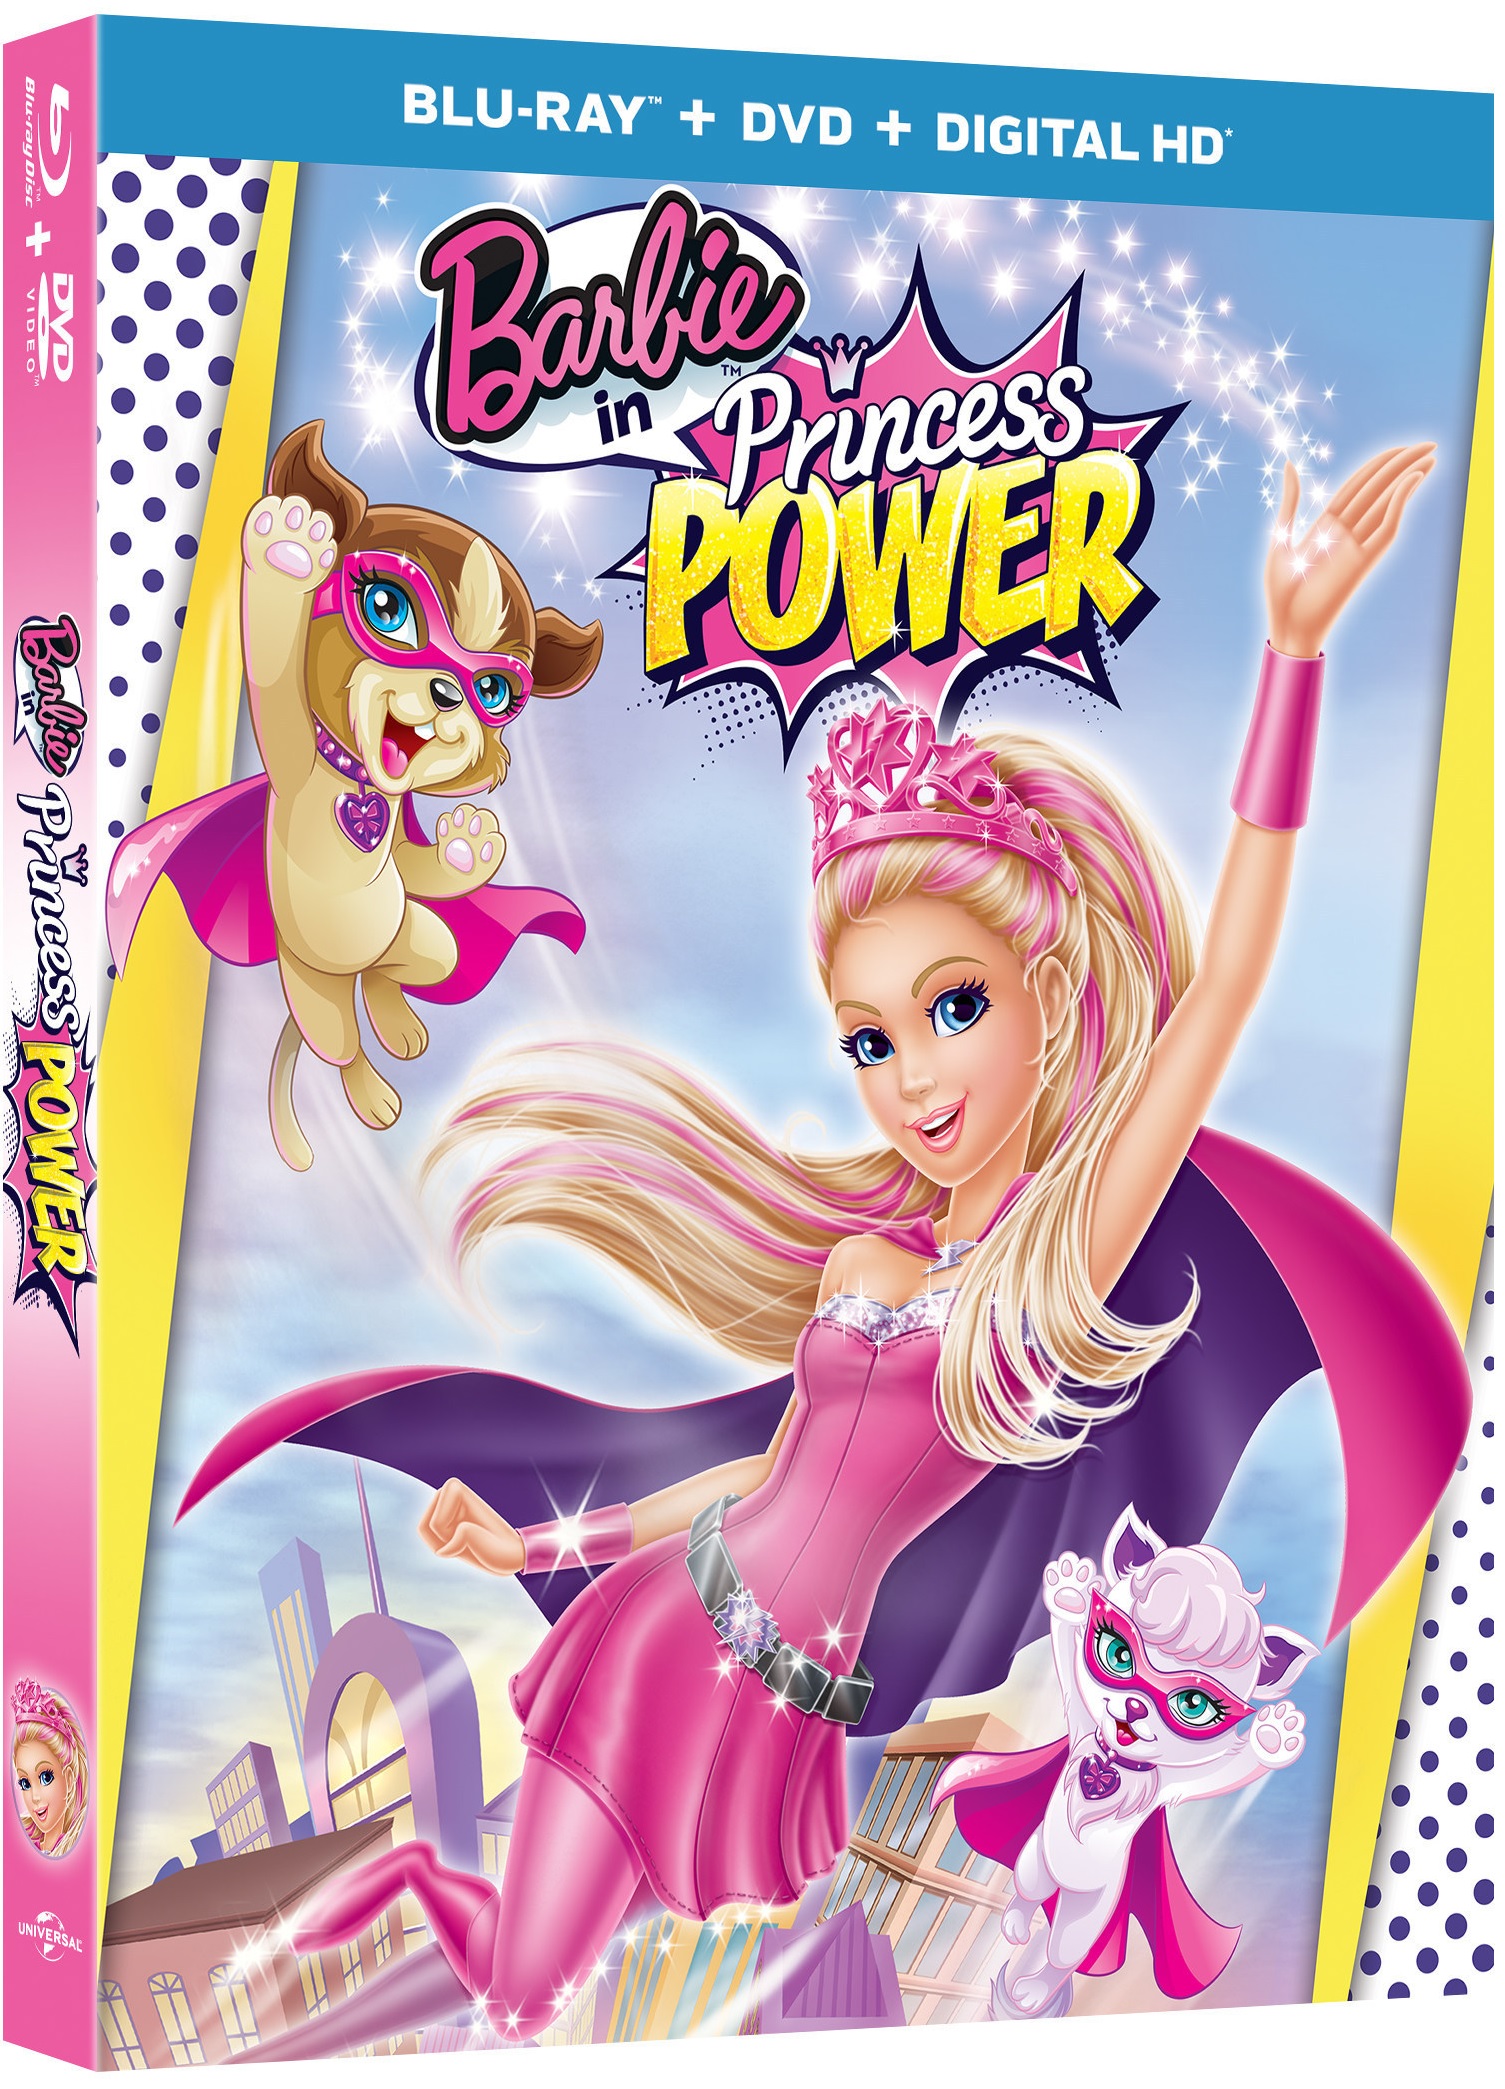 Barbie in Princess Power Blu-ray Review